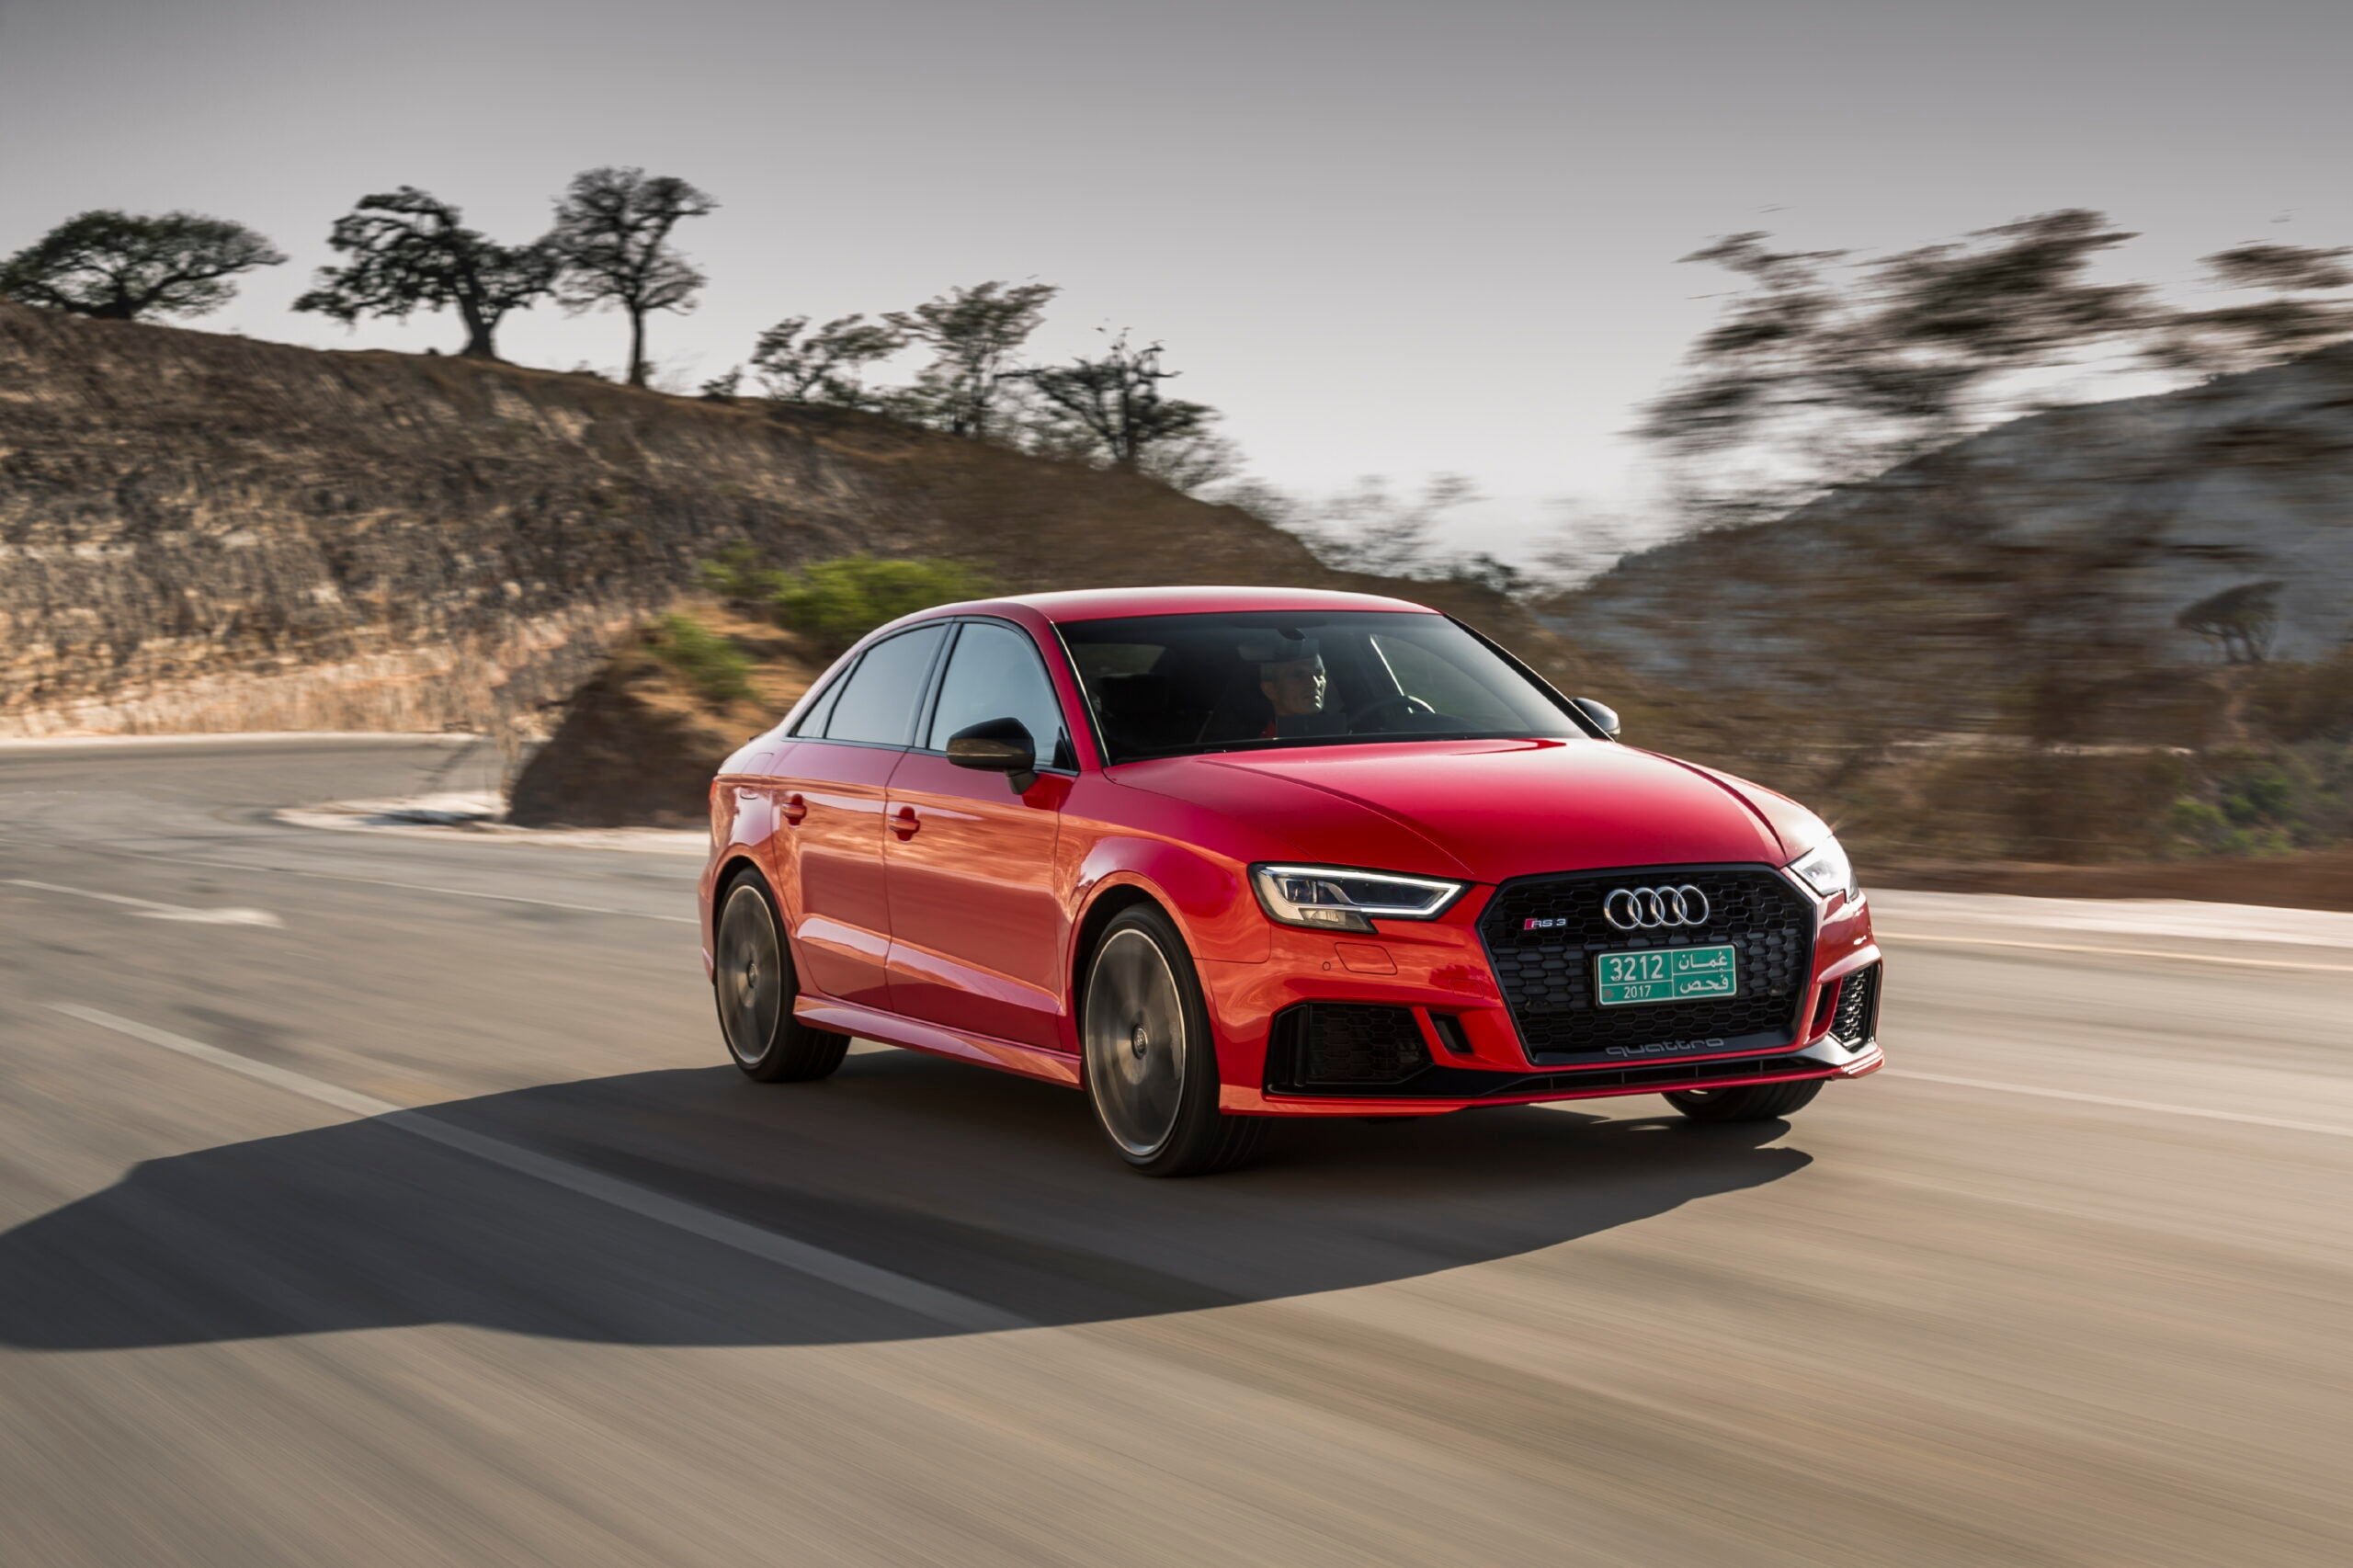 What the experts say about the 2018 Audi RS 3